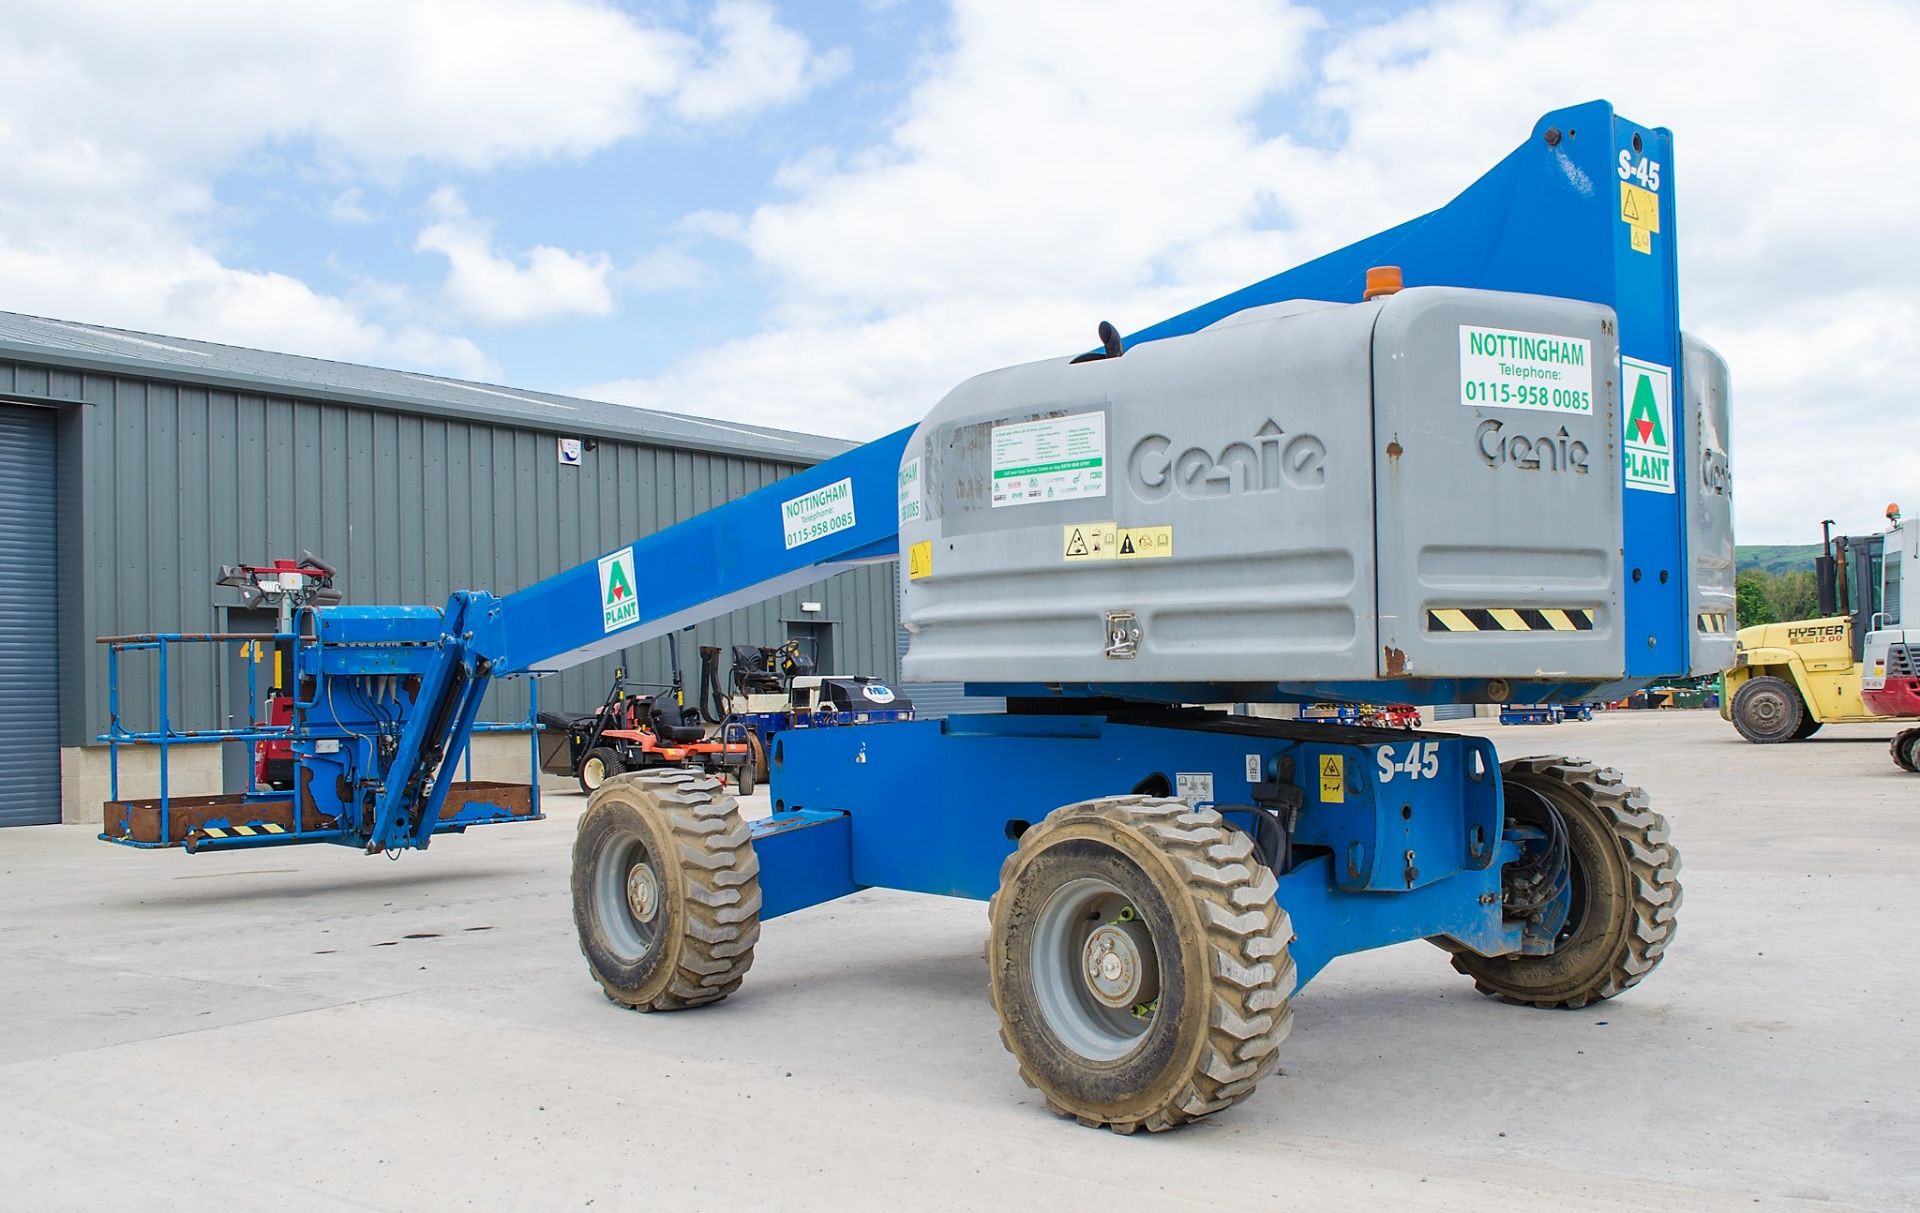 Genie S-45 diesel driven 45 ft boom lift access platform Year: 2014 S/N: 54514-18197 Recorded Hours: - Image 4 of 18